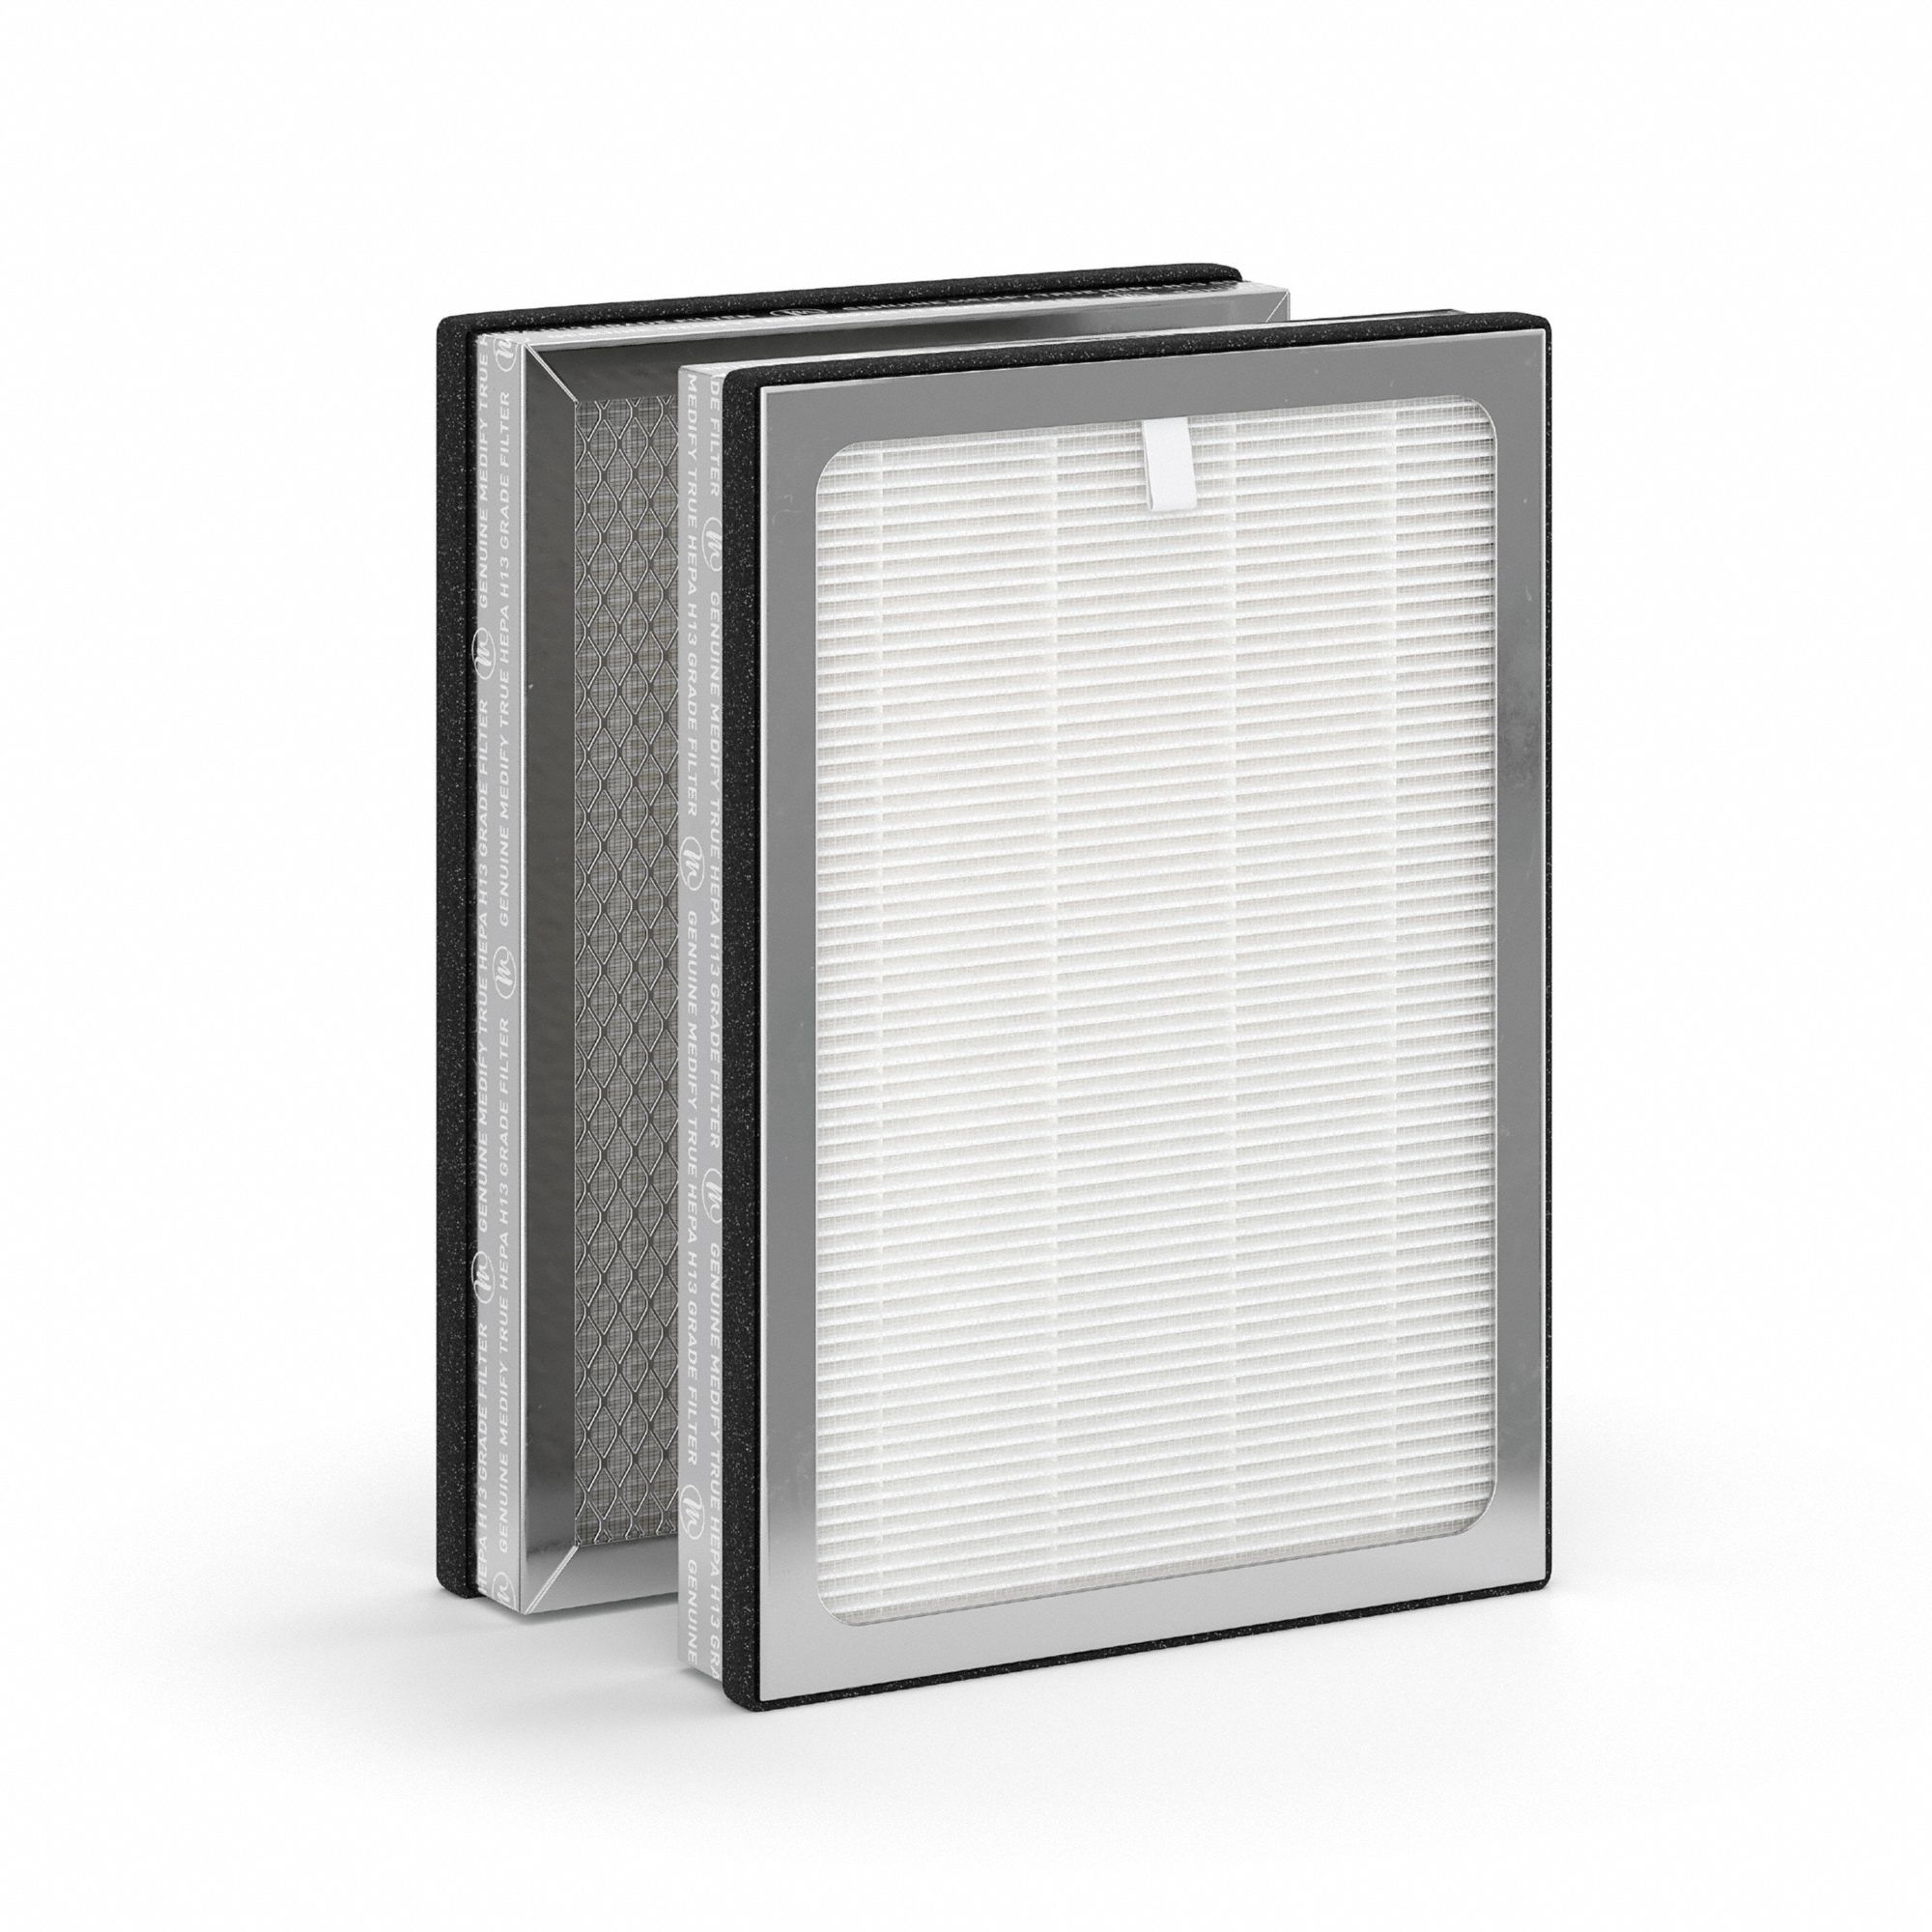 Replacement filter for MA-25: HEPA/Pleated/Carbon, MERV 17